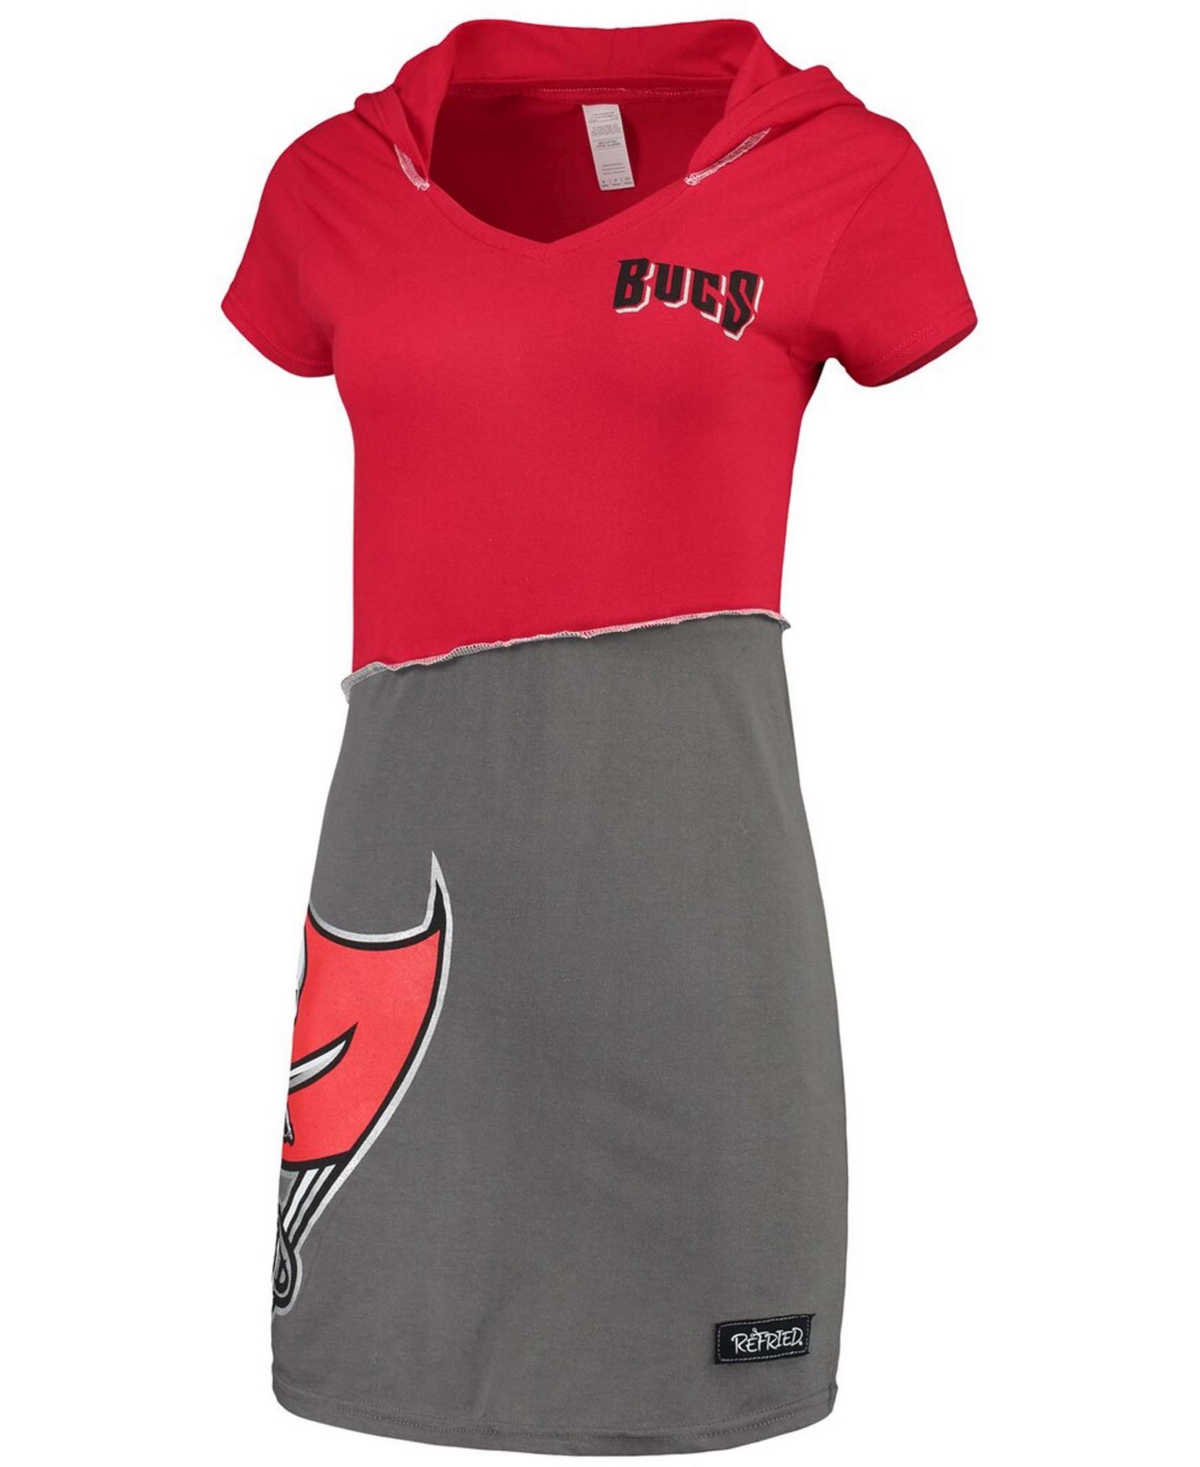 Women's Refried Apparel Red and Pewter Tampa Bay Buccaneers Hooded Mini Dress - Red, Pewter